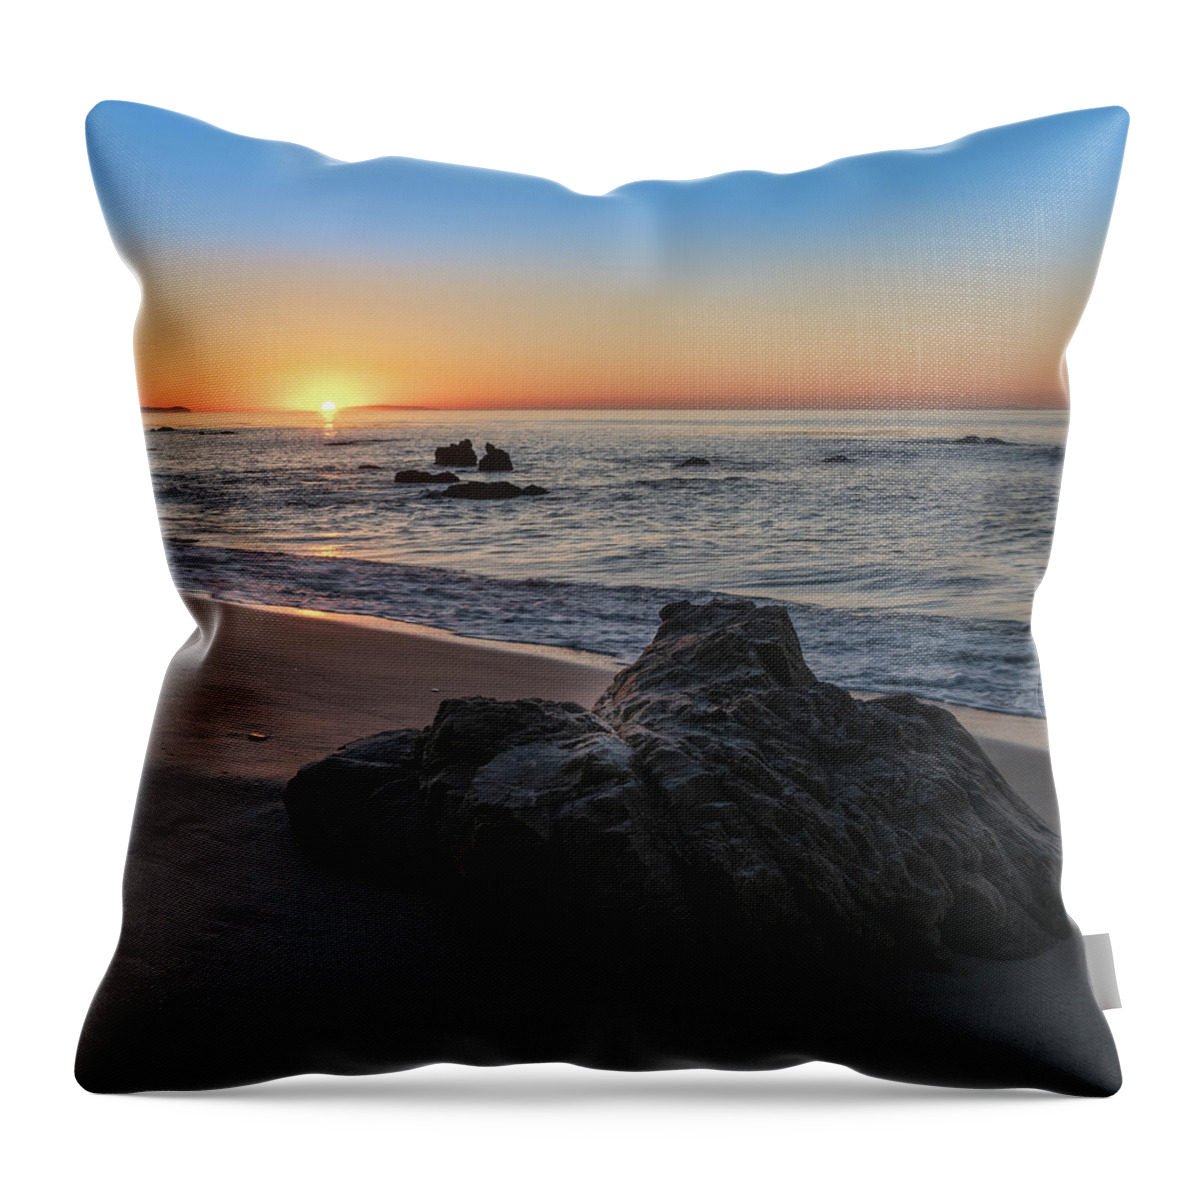 Leo Carrillo Throw Pillow featuring the photograph Beach Rock at Sunrise by Matthew DeGrushe